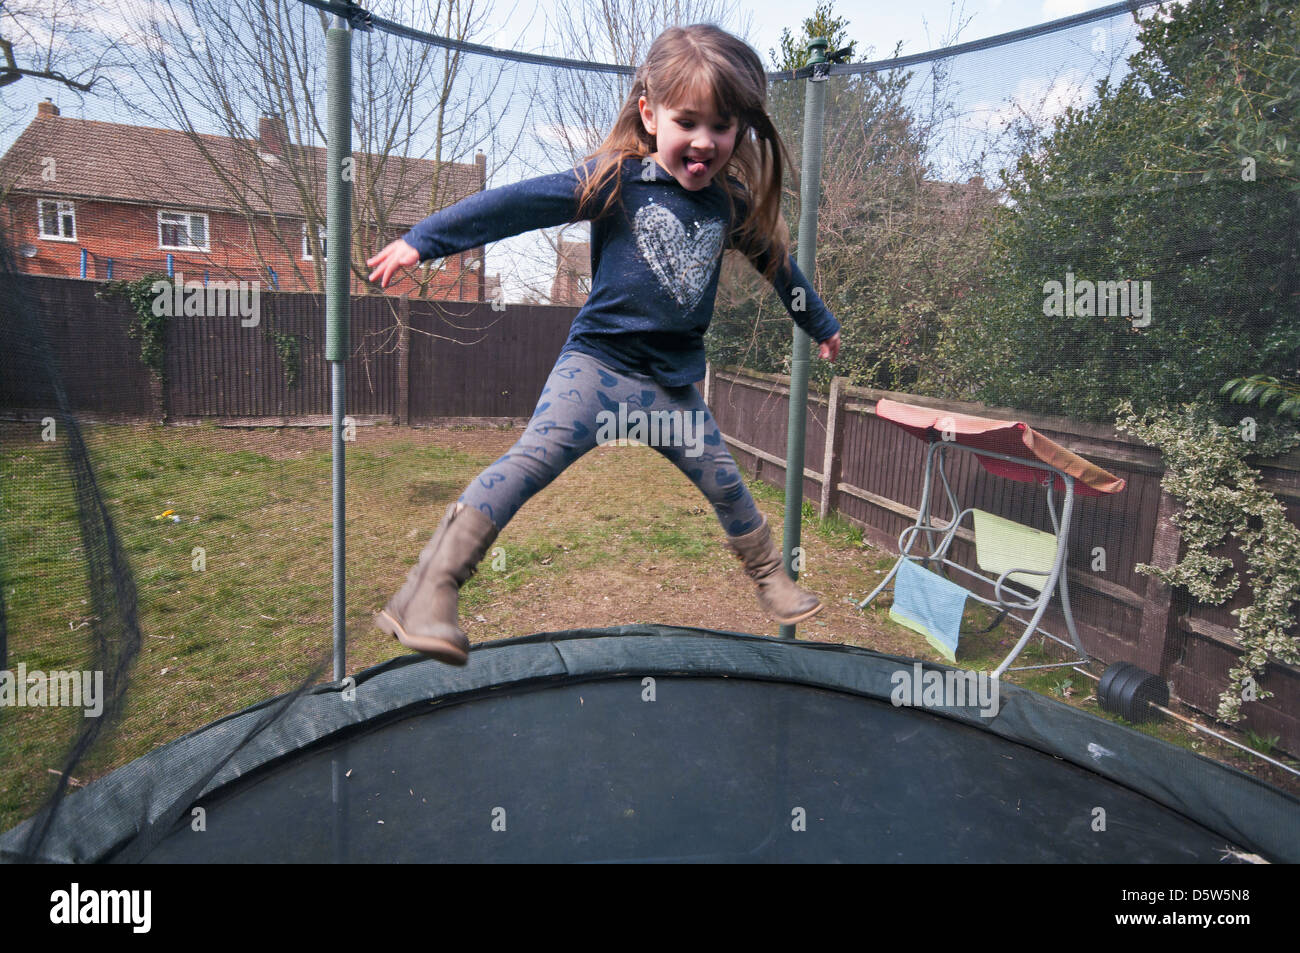 5 Year Old Girl Bouncing On A Garden Trampoline Stock Photo